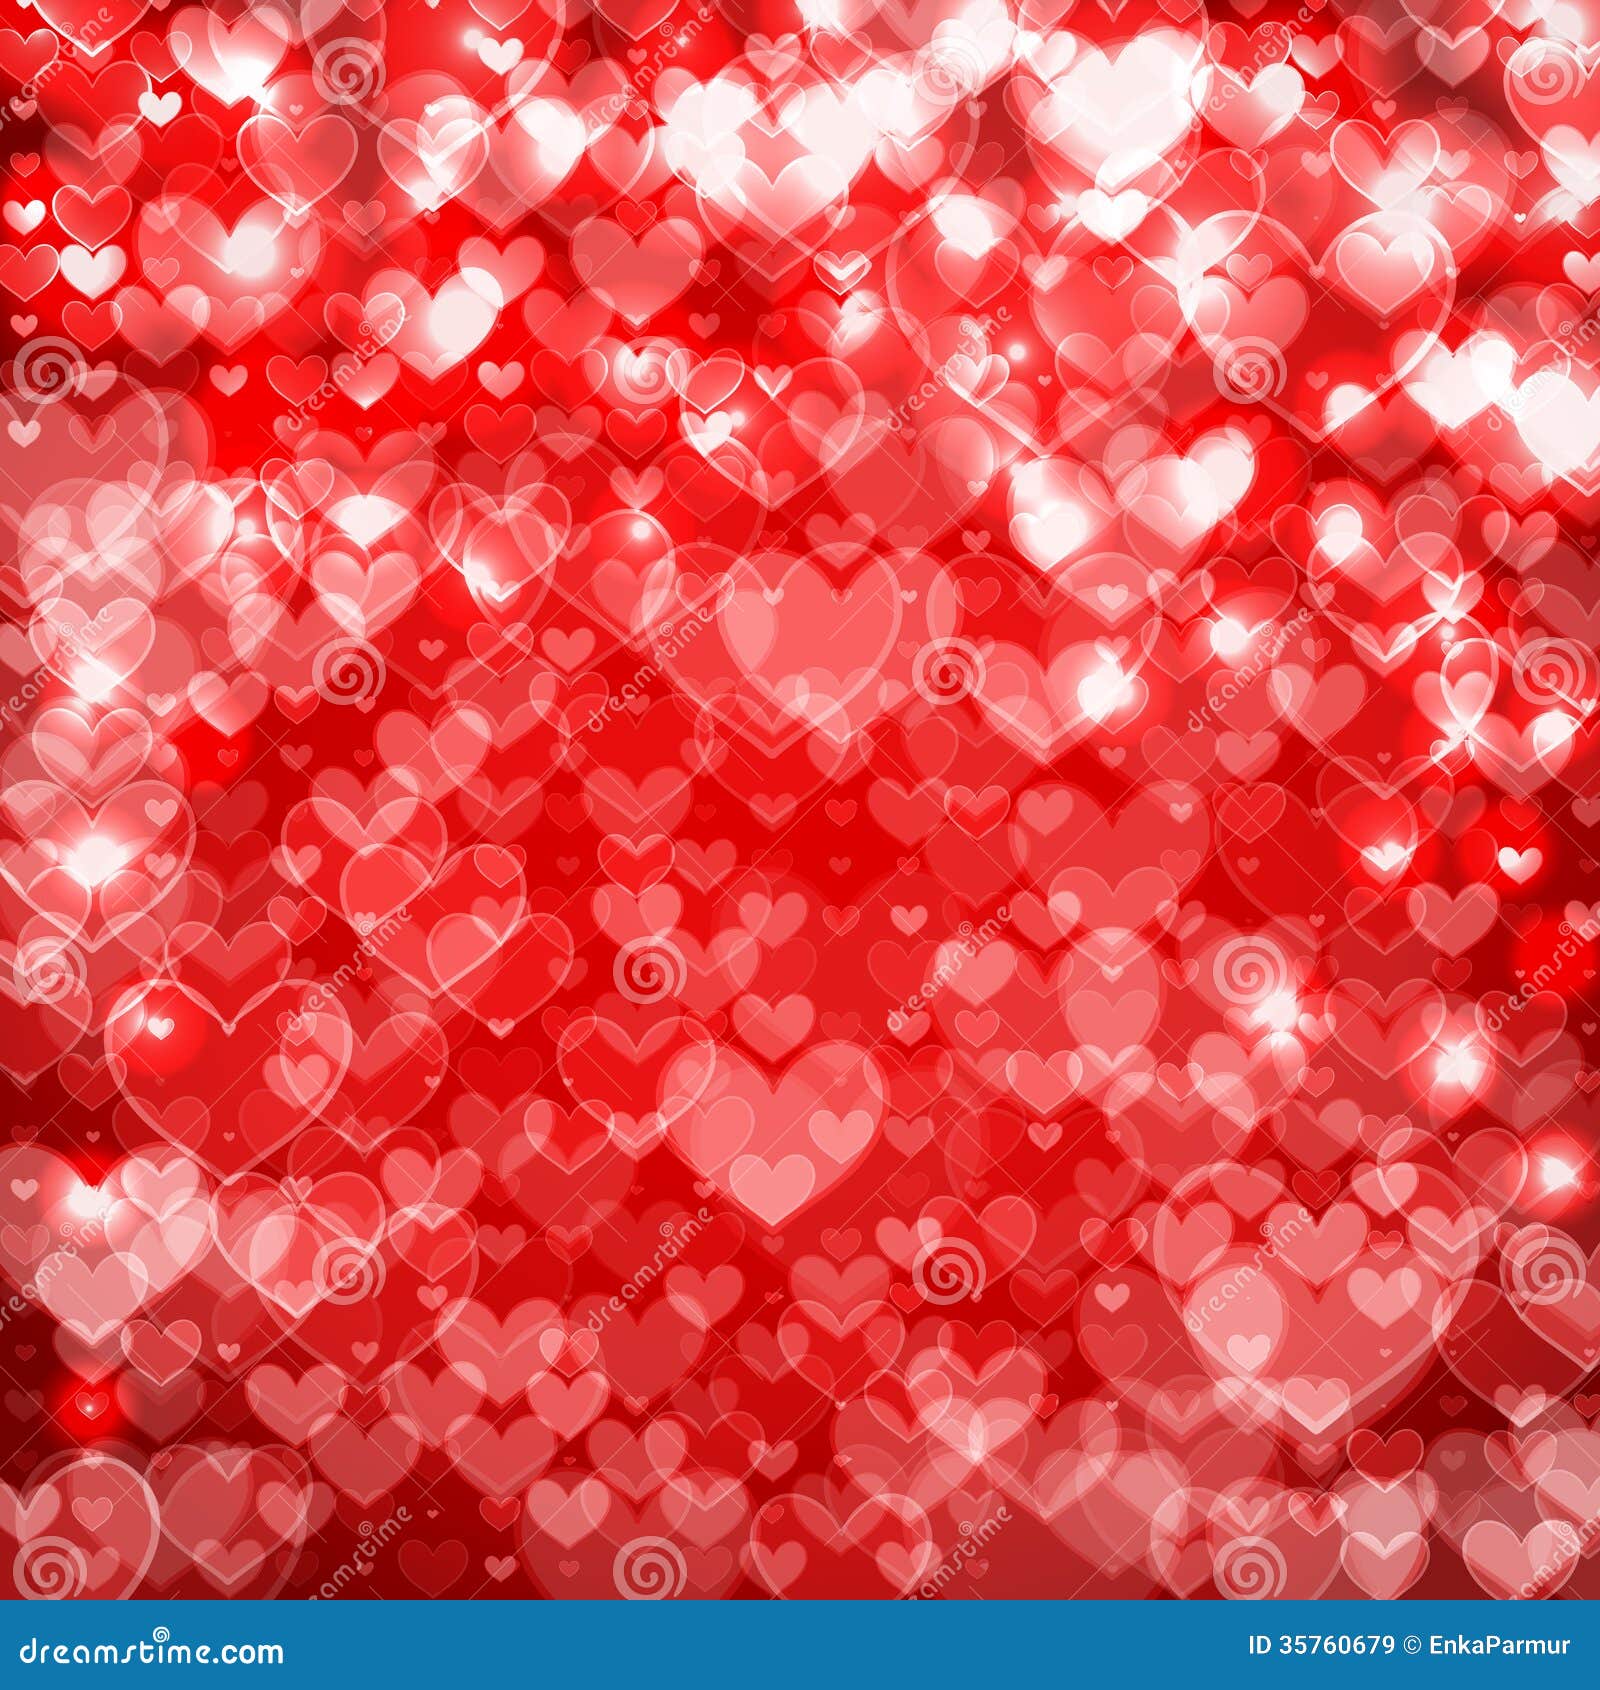 Big Hearts Red Abstract Background Sparkling Royalty Free ...